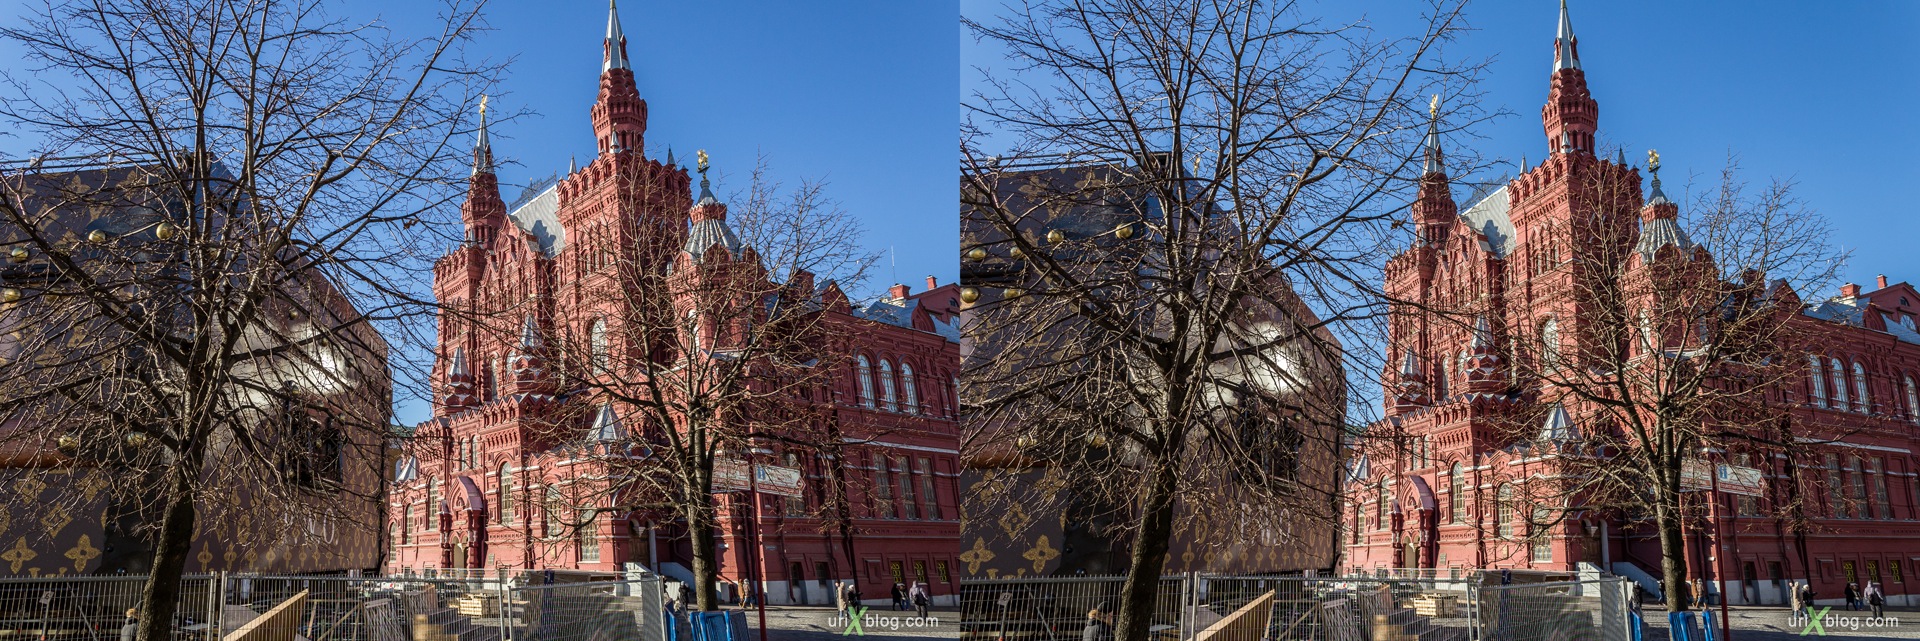 2013, Moscow, Russia, Red Square, street, new pedestrian zone, 3D, stereo pair, cross-eyed, crossview, cross view stereo pair, stereoscopic